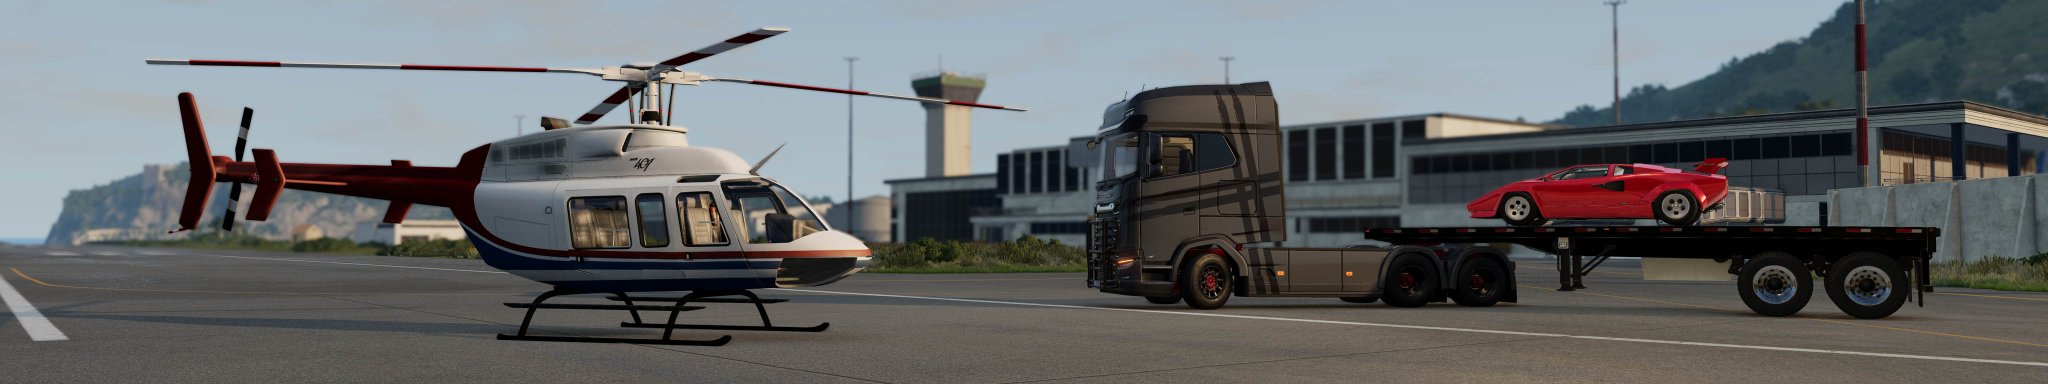 1 BeamNG HELICOPTOR at ITALY AIRPORT with LAMBO COUNTACH copy.jpg